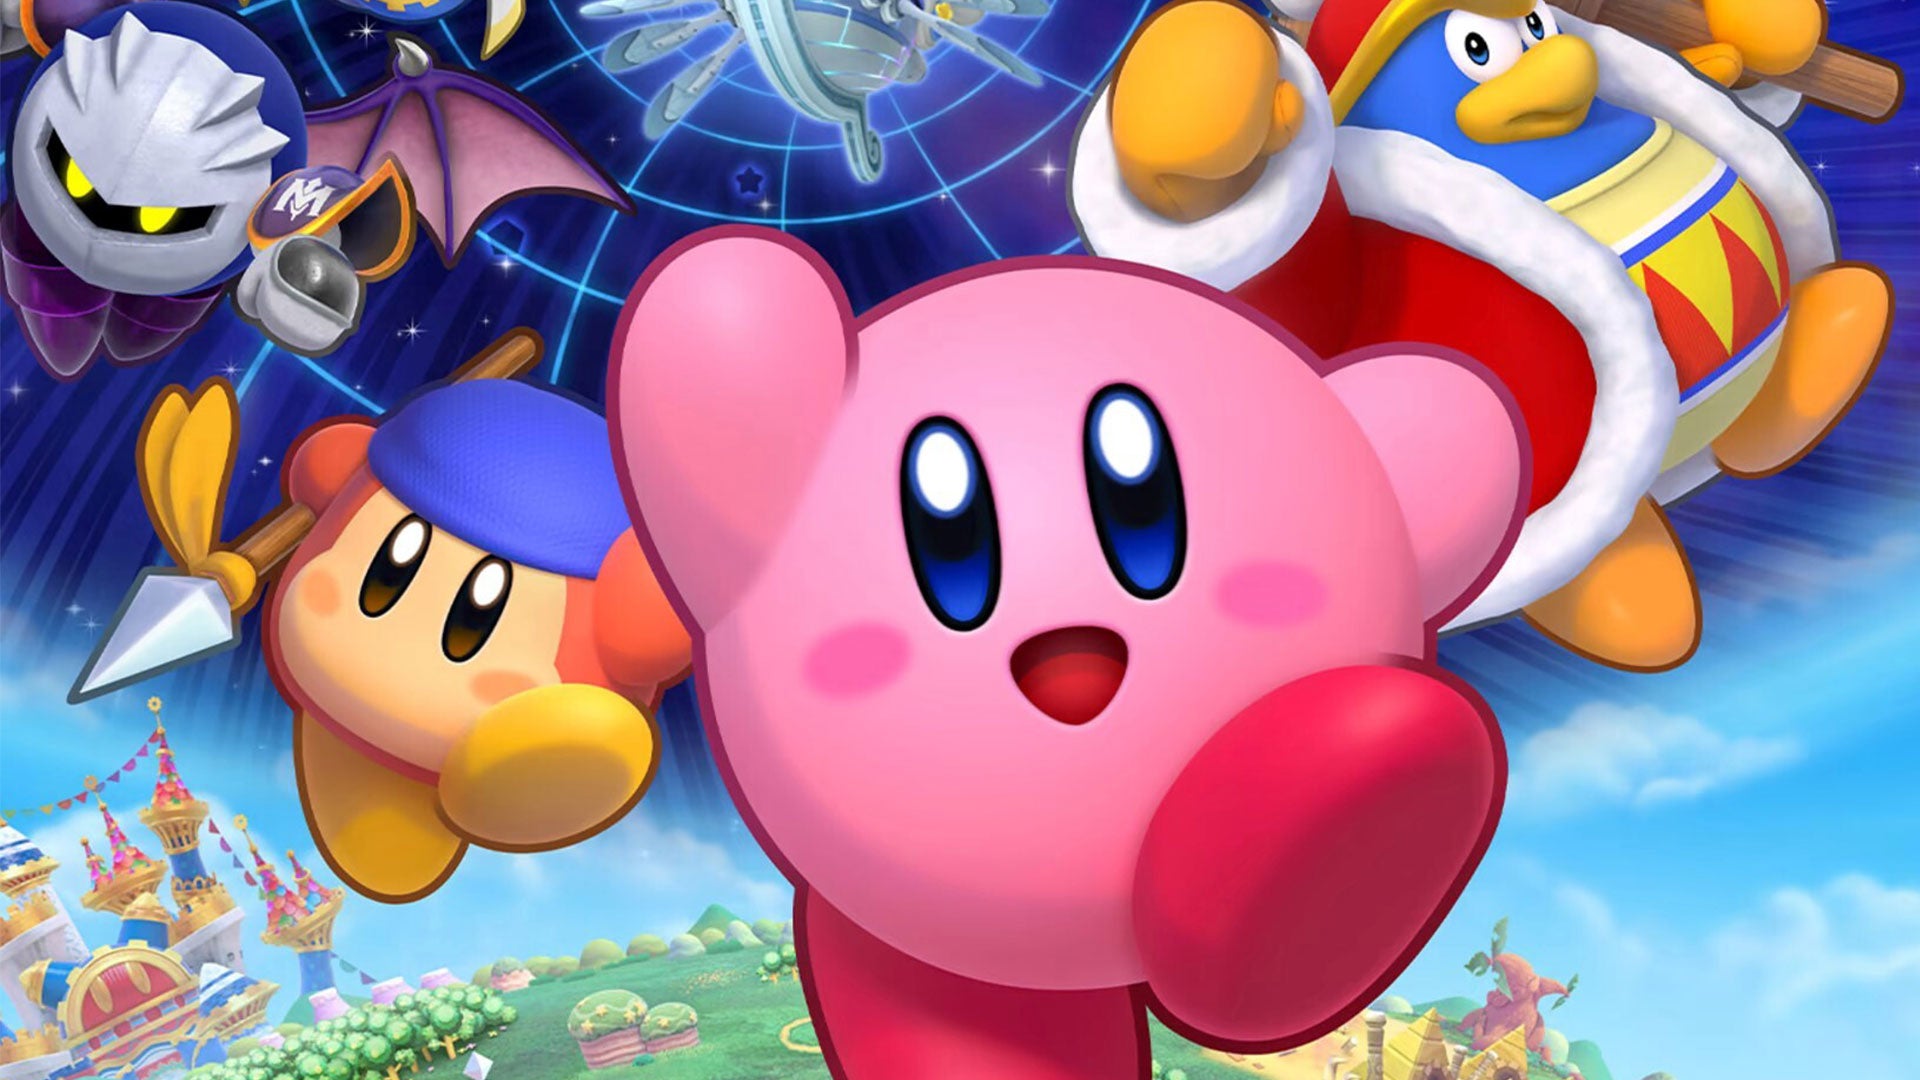 Rent Kirby's Return to Dream Land Deluxe on Nintendo Switch